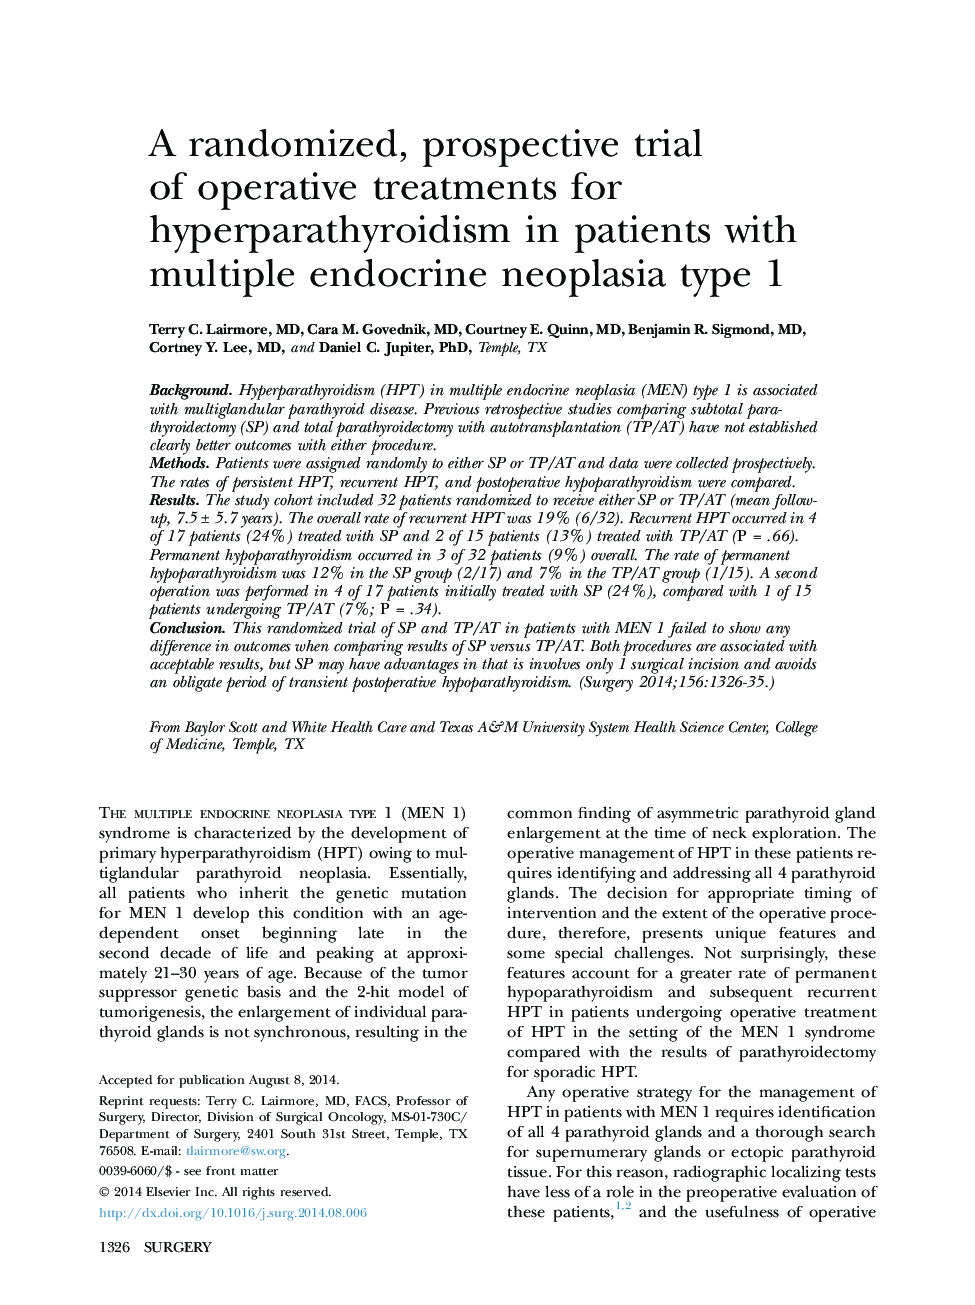 A randomized, prospective trial of operative treatments for hyperparathyroidism in patients with multiple endocrine neoplasia type 1